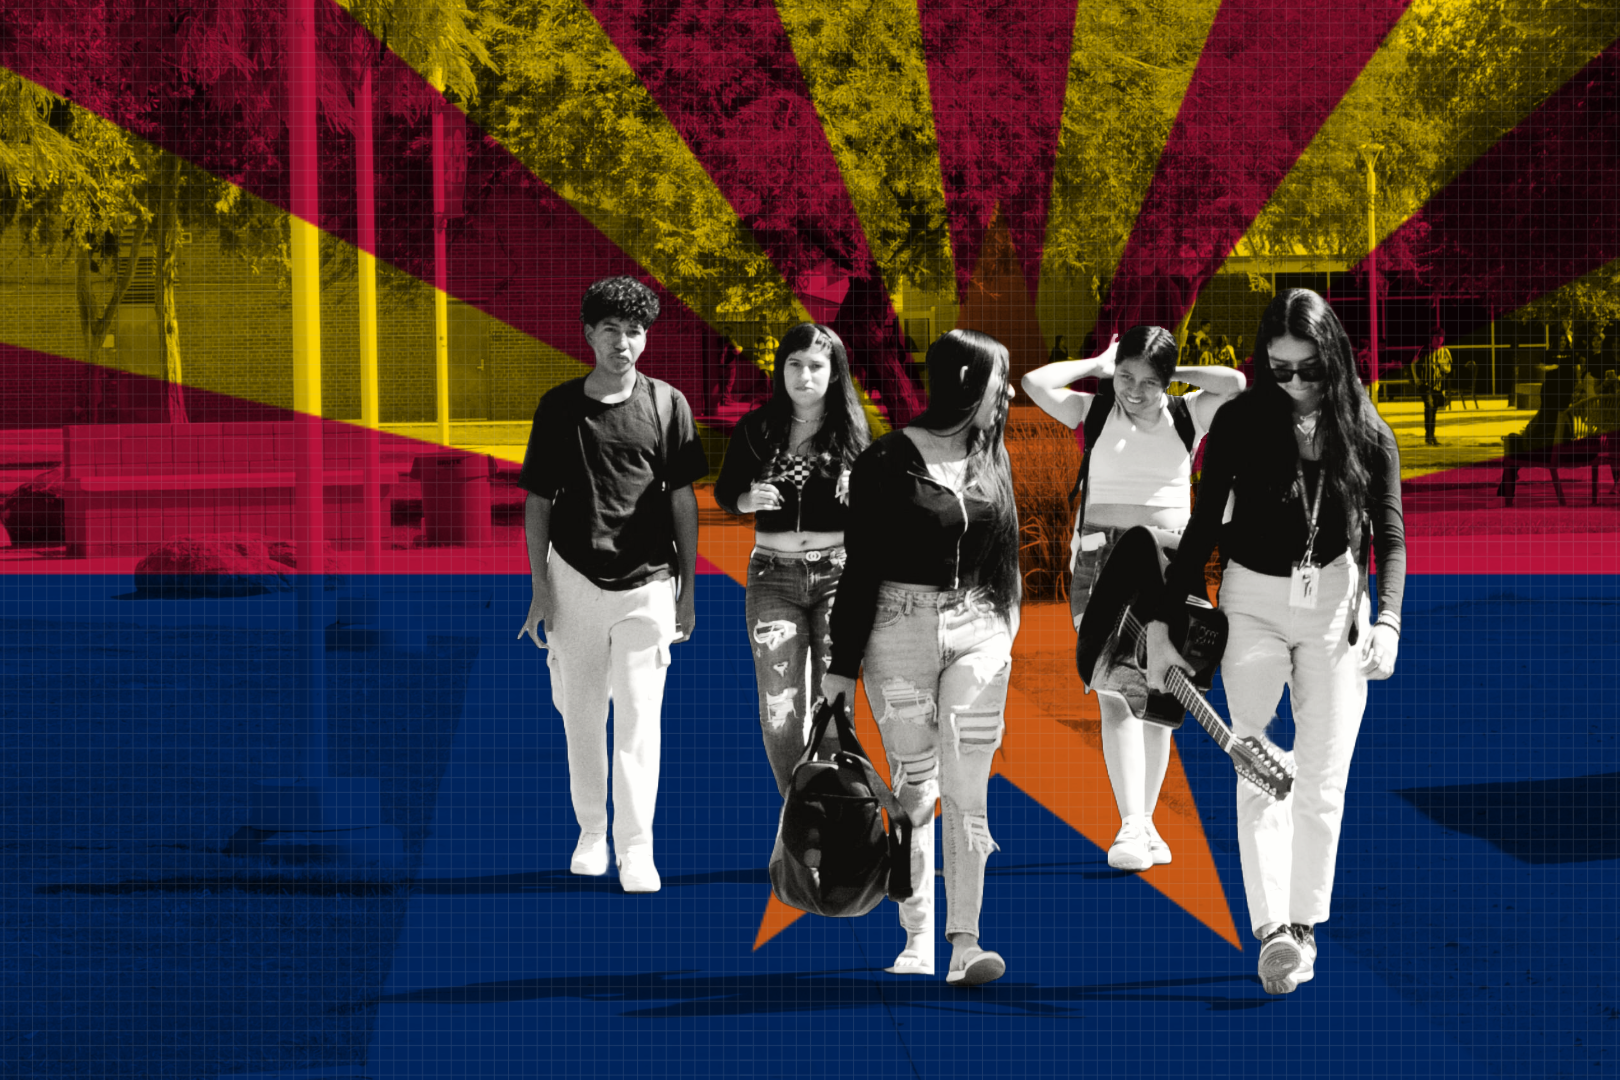 In Arizona, a legacy of English-only education, systemic racism and xenophobic laws create a mental health crisis among Latino students